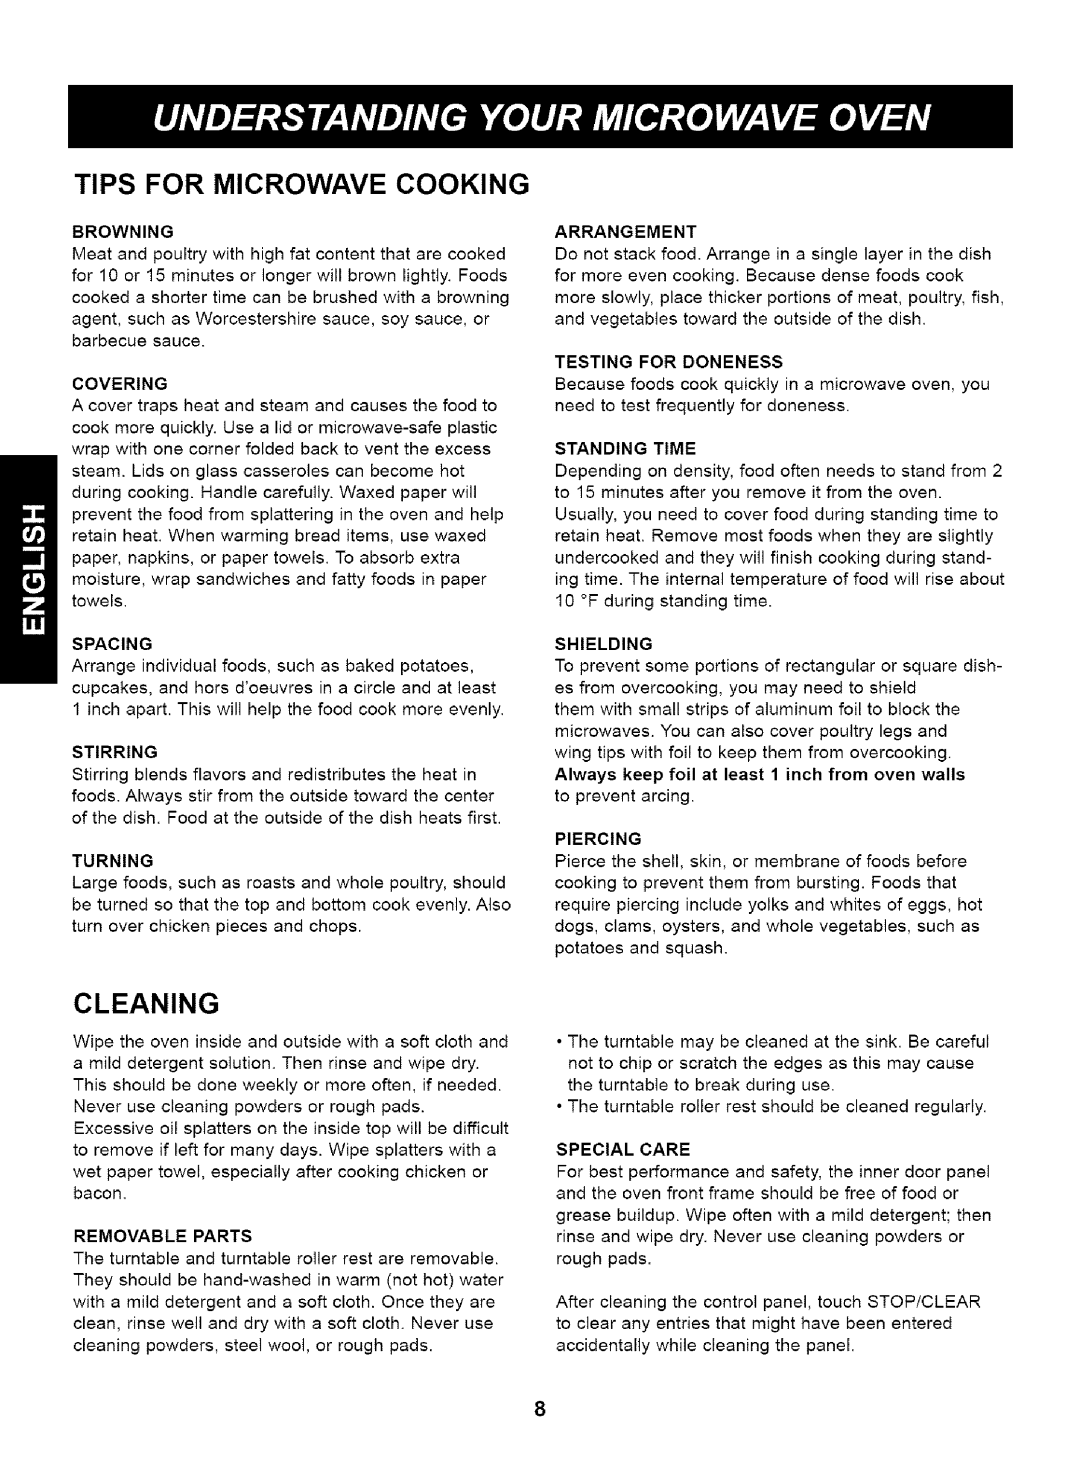 Kenmore 721.63263 manual Tips For Microwave Cooking, Cleaning 